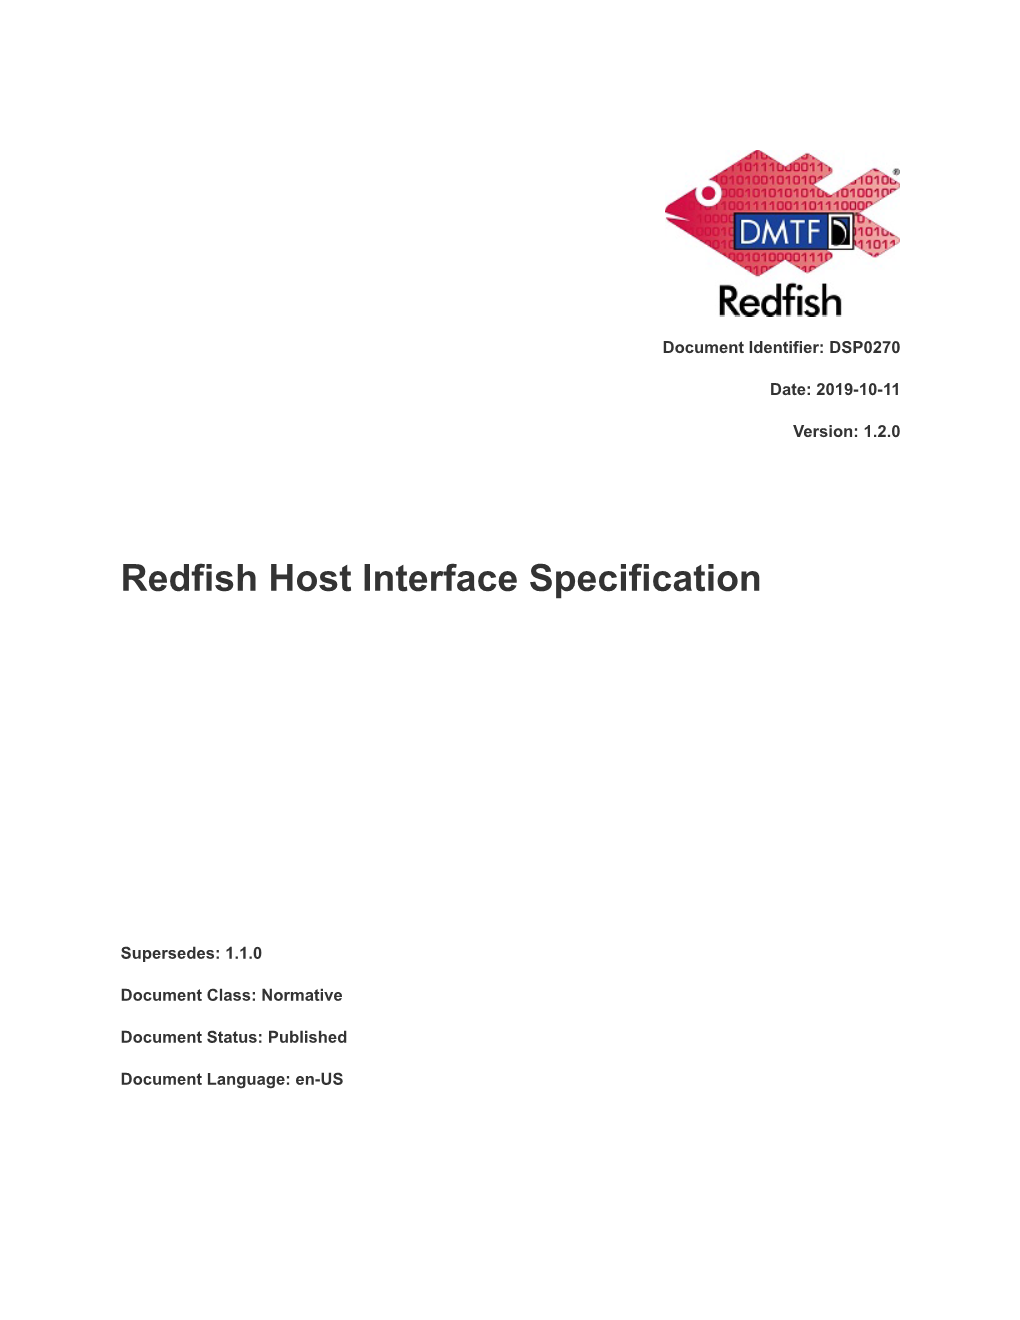 Redfish Host Interface Specification